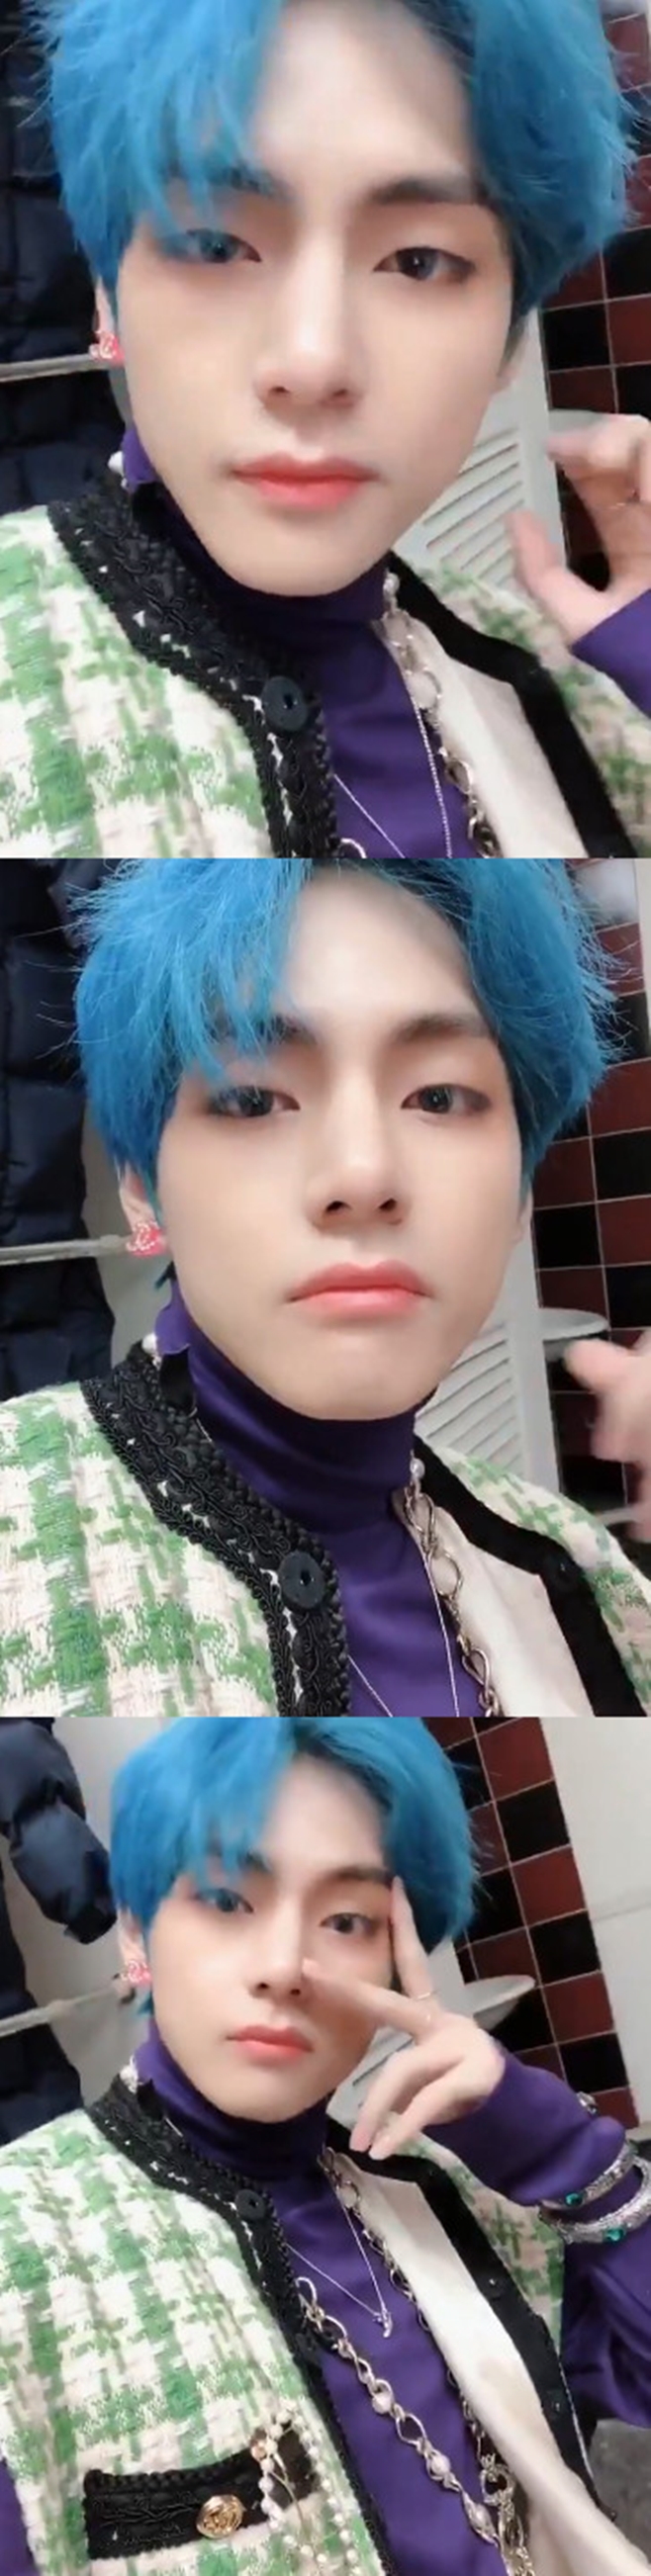 BTS member Vu has released a self-camera.On the 3rd, Vu released a self-camera video on the official SNS.In the public image, there is a picture of a buff dyed blue hair.Vue took various poses, such as posing V while looking at the camera and pressing the ball with his fingers.The group BTS, which he belongs to, will release their new album Map of the Soul: Persona (MAP OF THE SOUL: PERSONA) on the 12th.